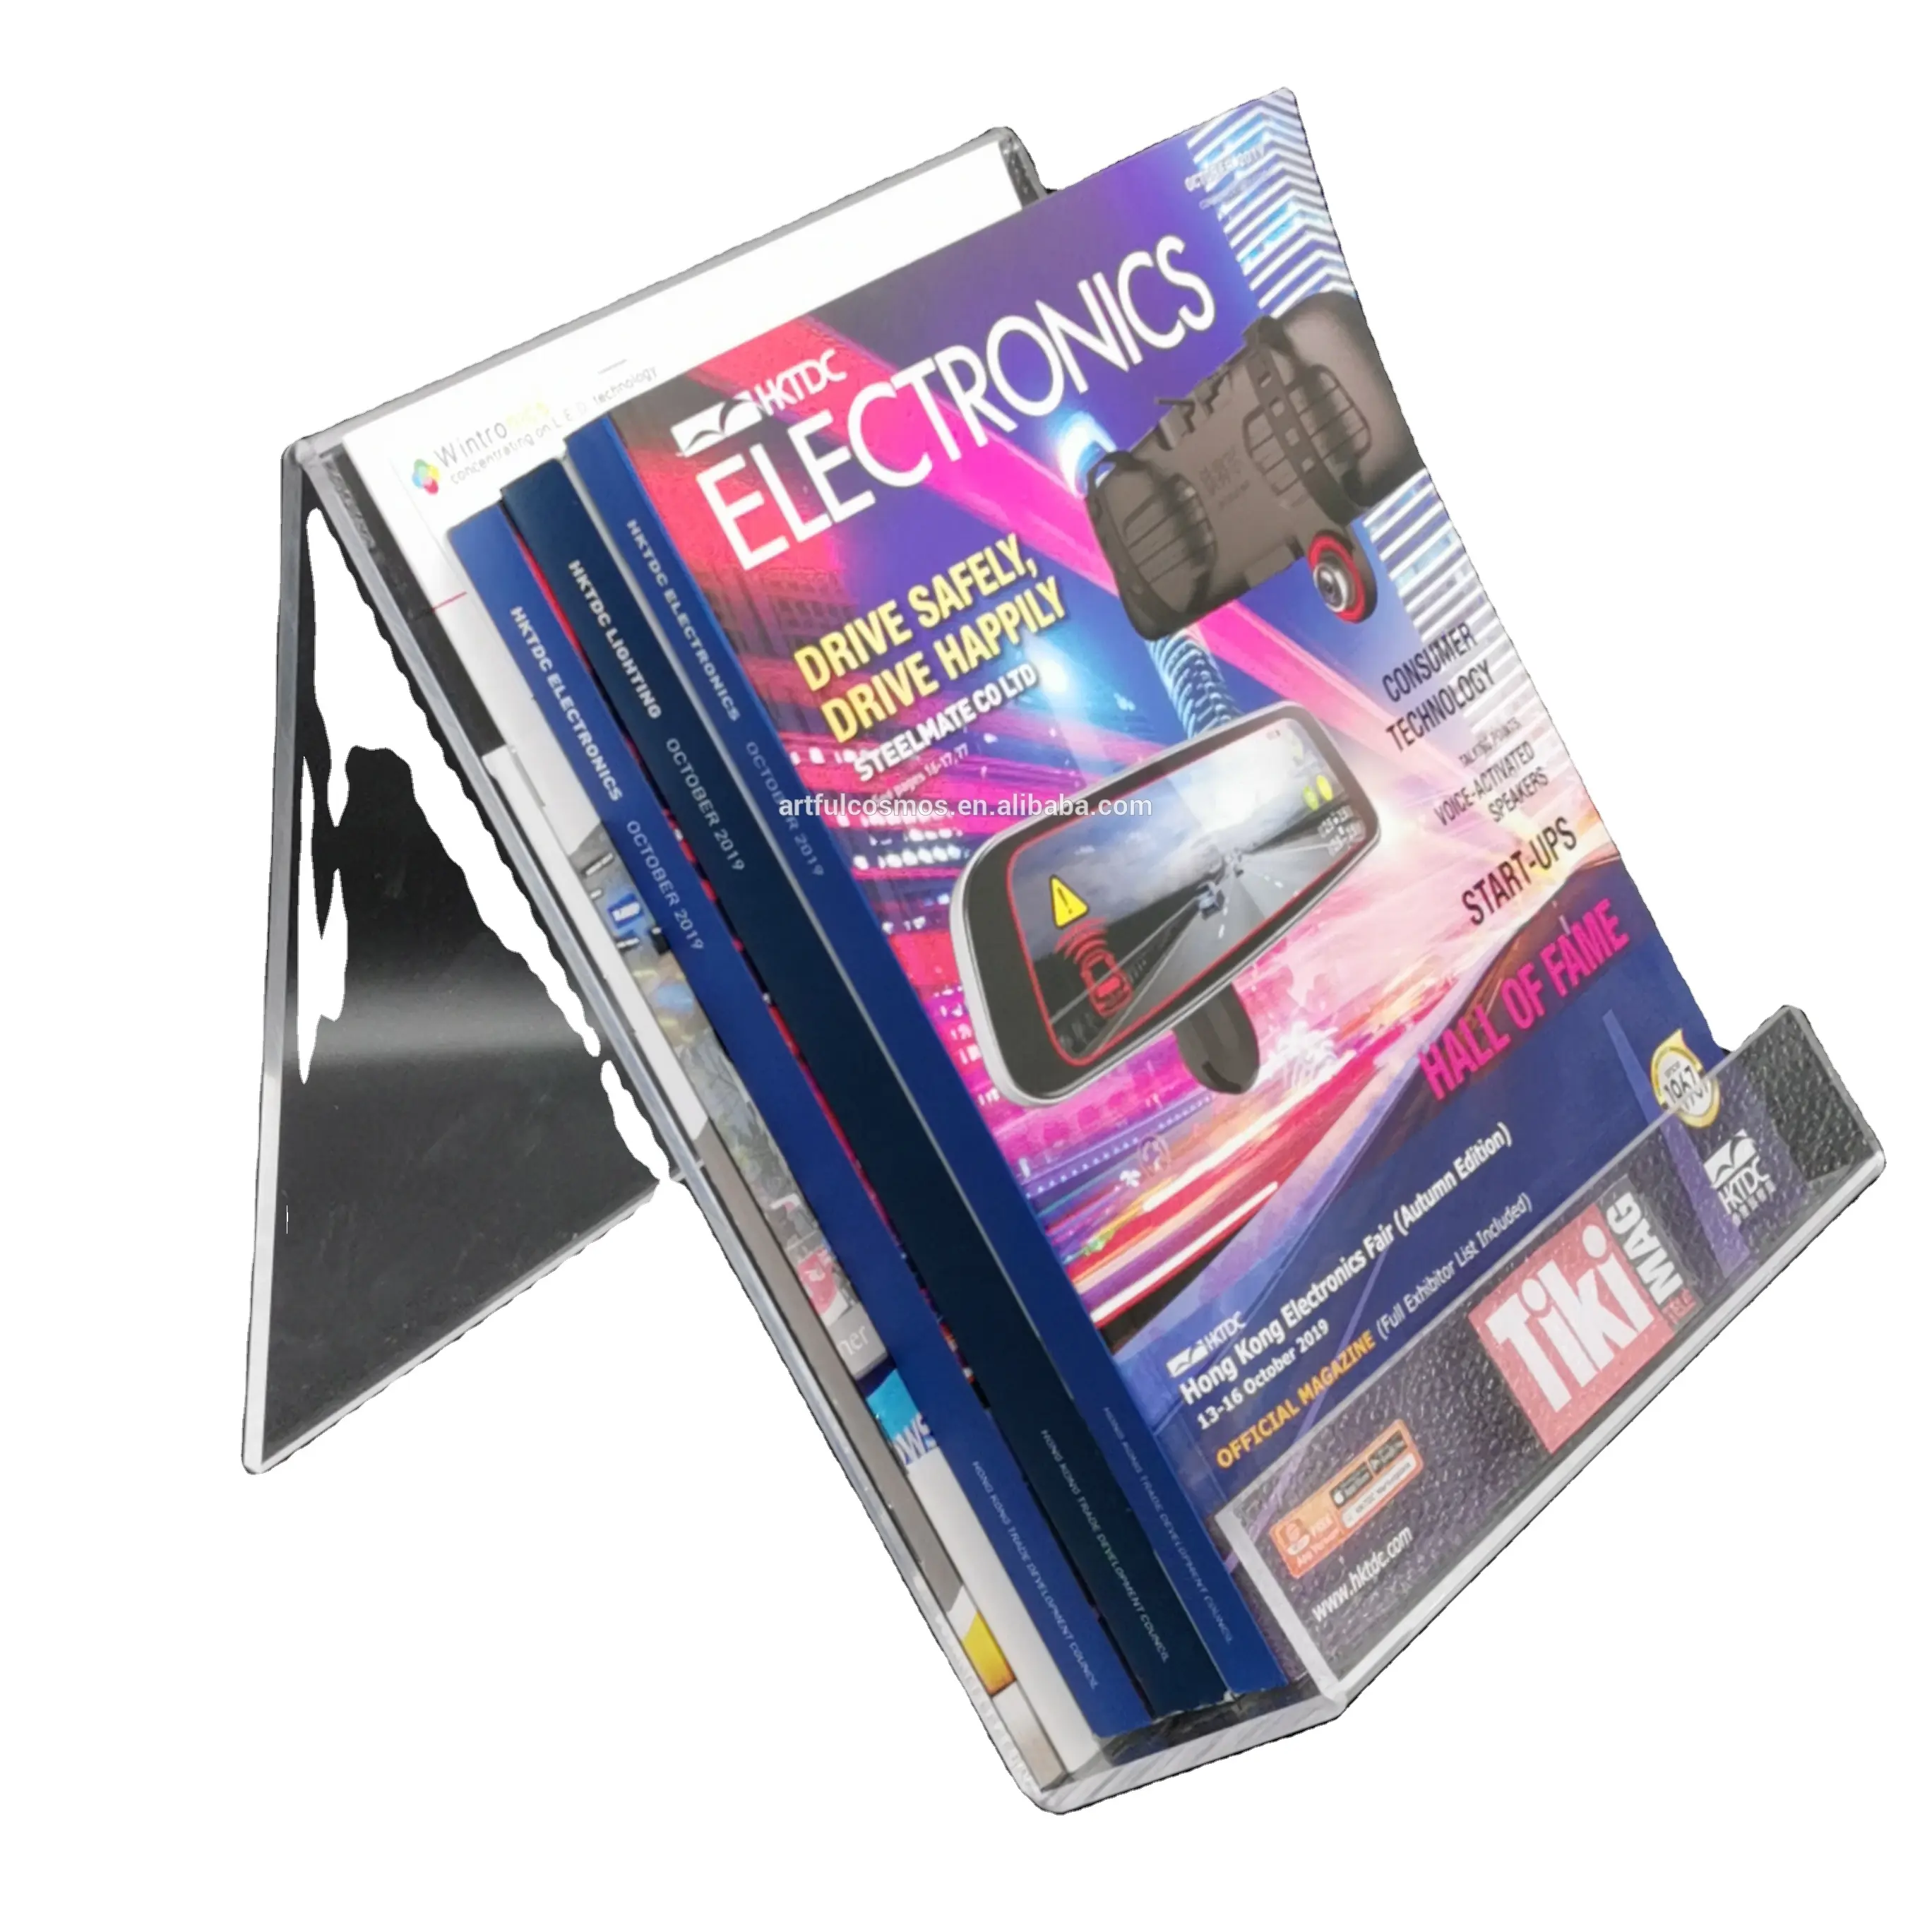 Custom Acrylic Book Display Stand Clear Acrylic Display Stand For Book Magazine Comic Easel Phone Tablet Holder